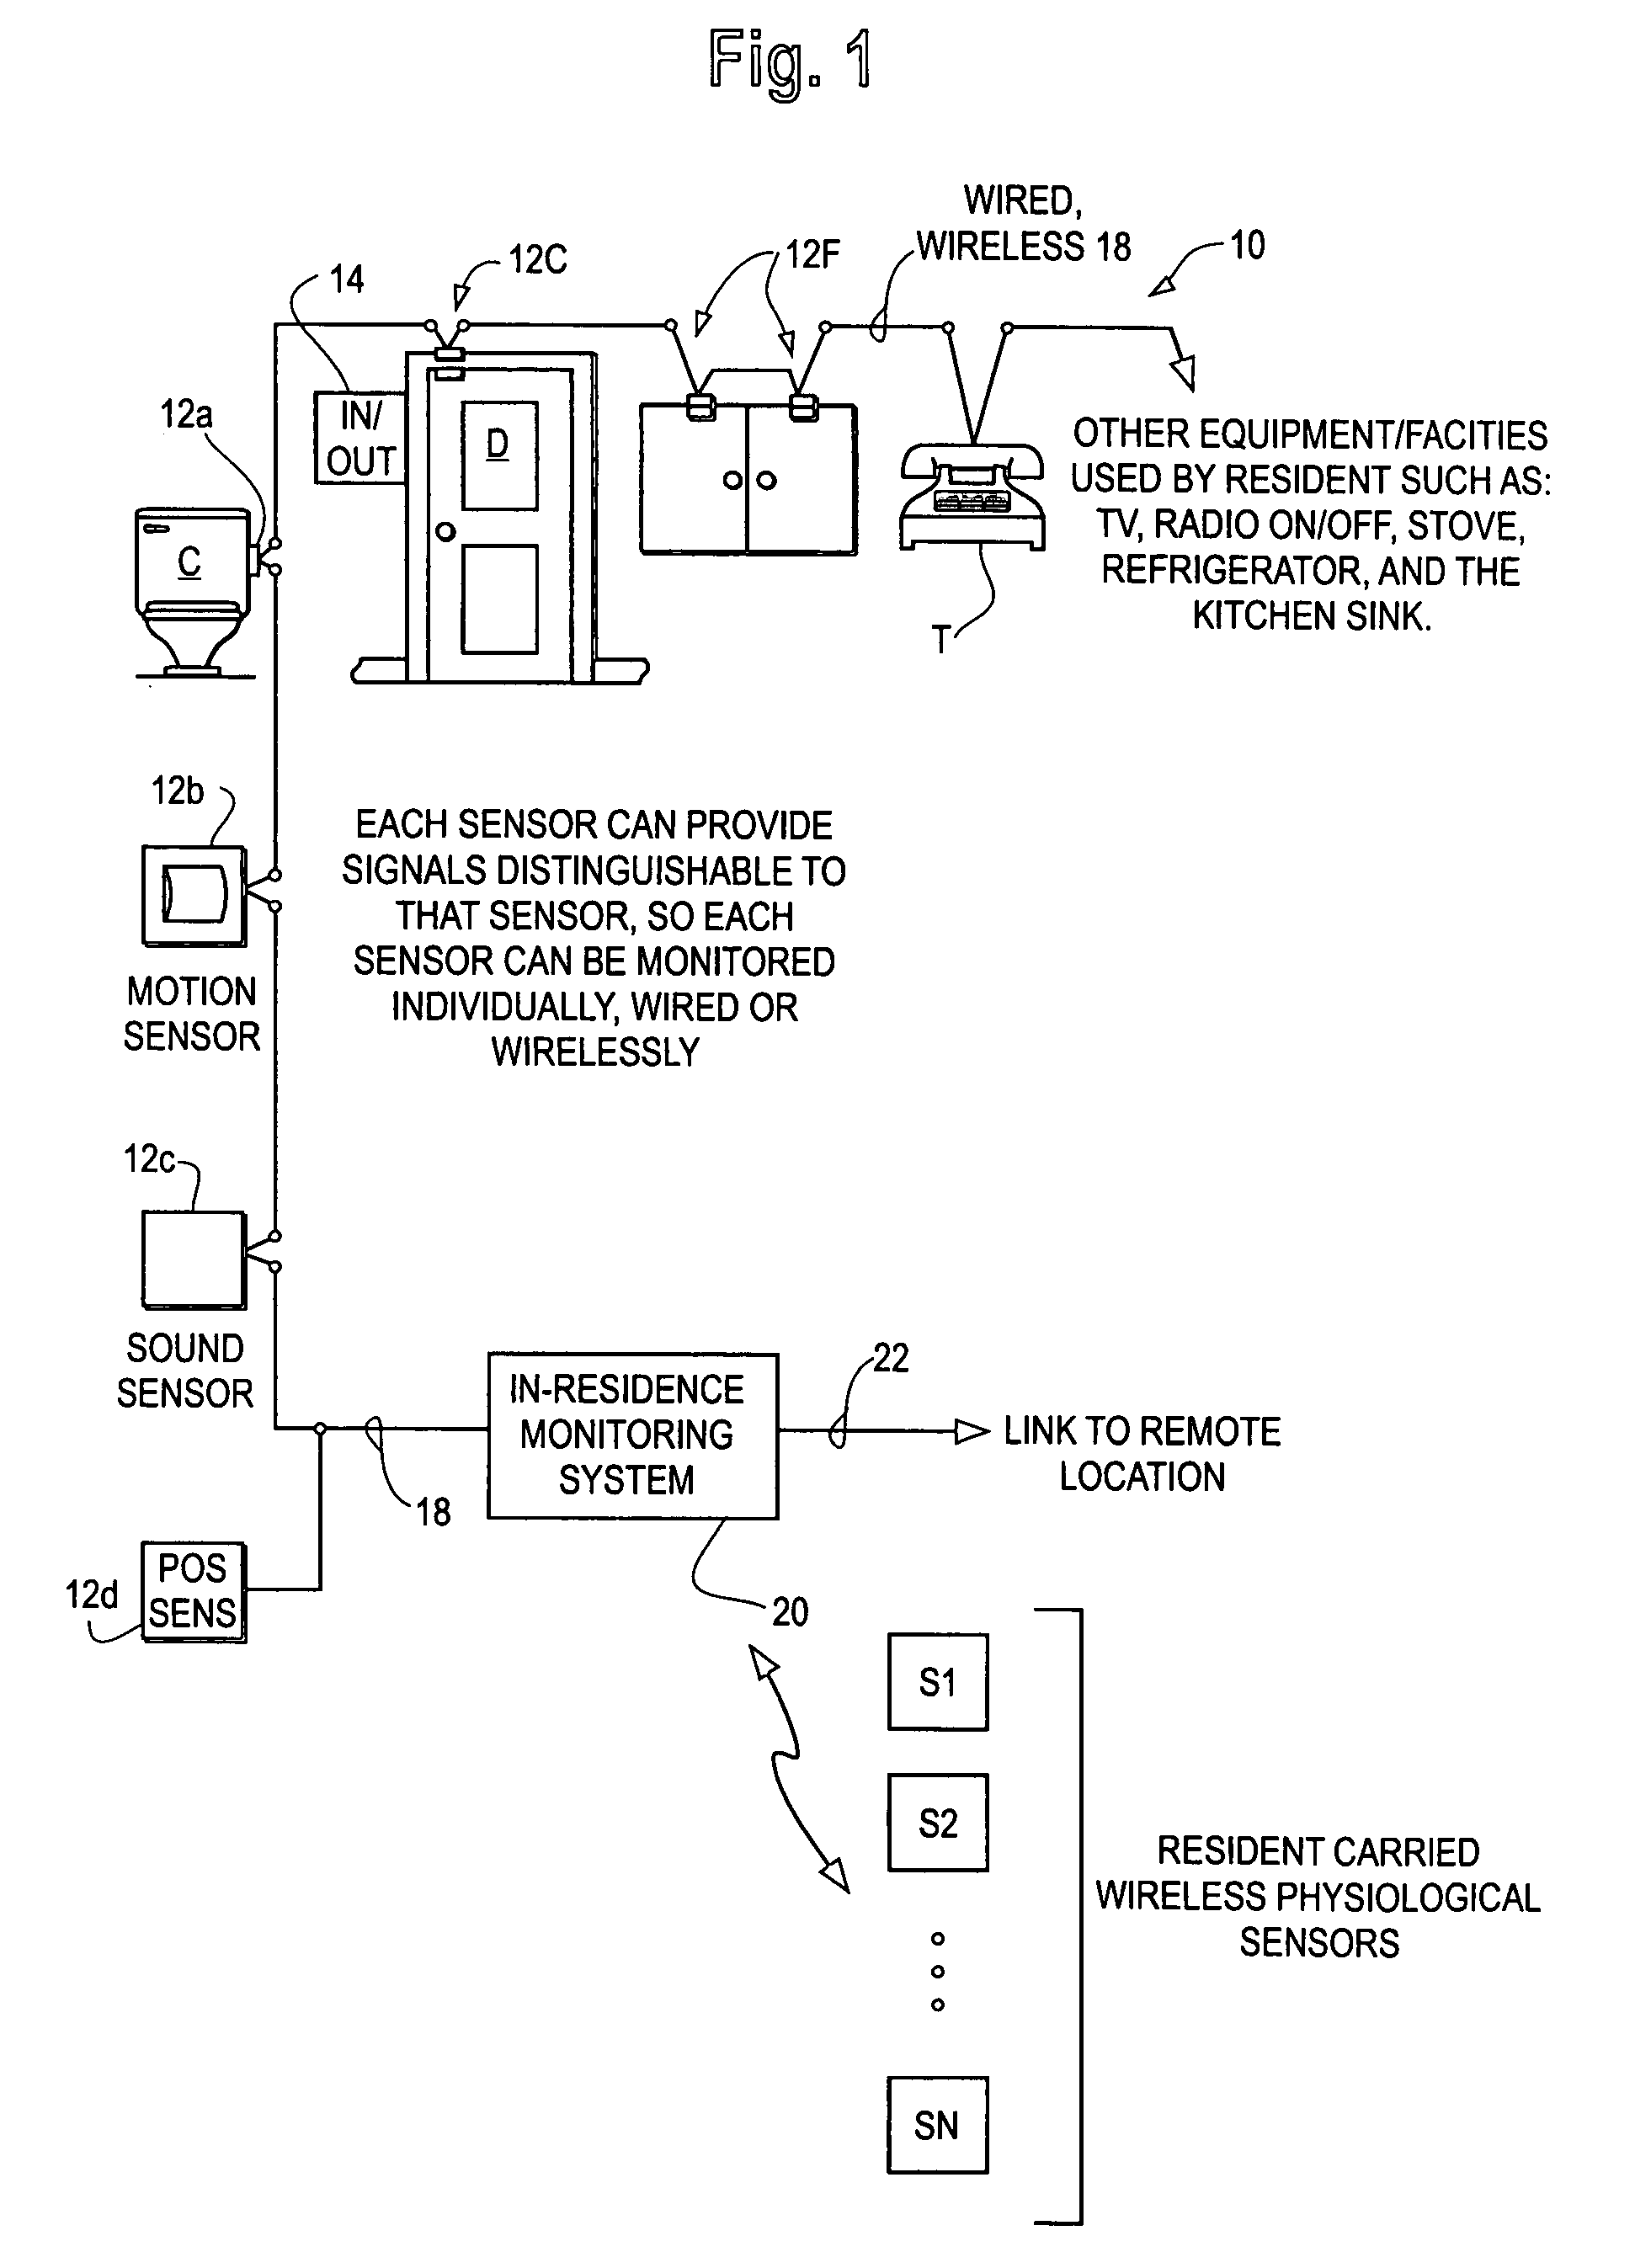 System for monitoring activities and location